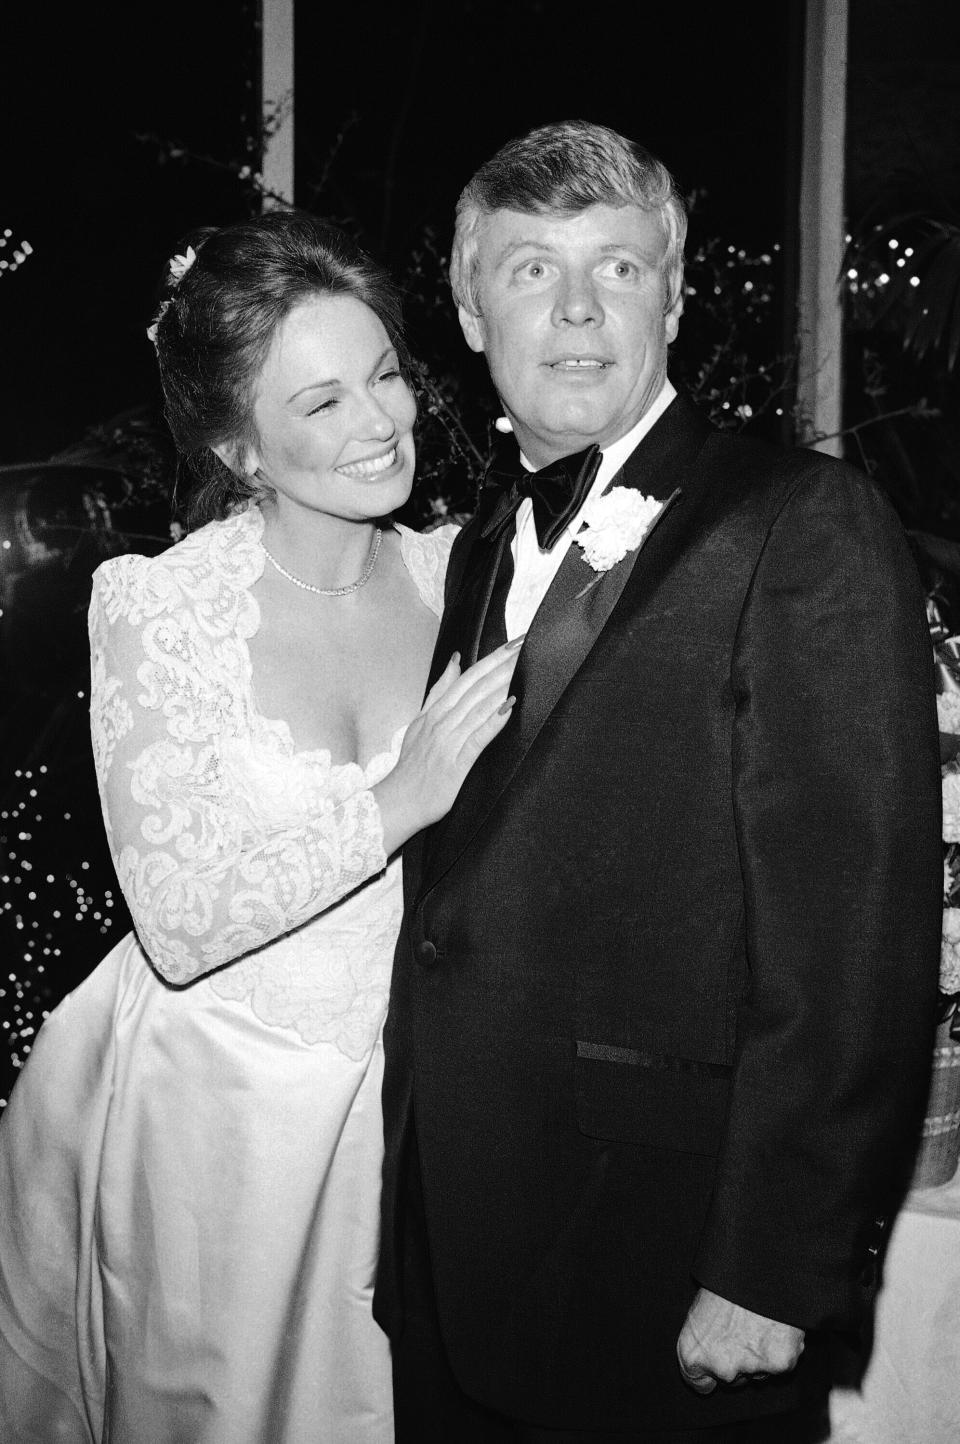 FILE - In this Saturday, March 17, 1979 file photo, The former Phyllis George and her new husband Boston Celtics owner John Y. Brown, Jr., pose for cameramen during reception at New York's Tavern on the Green. Phyllis George, the former Miss America who became a female sportscasting pioneer on CBS's “The NFL Today” and served as the first lady of Kentucky, has died. She was 70. A family spokeswoman said George died Thursday, May 14, 2020, at a Lexington hospital after a long fight with a blood disorder. (AP Photo/ G. Paul Burnett, File)